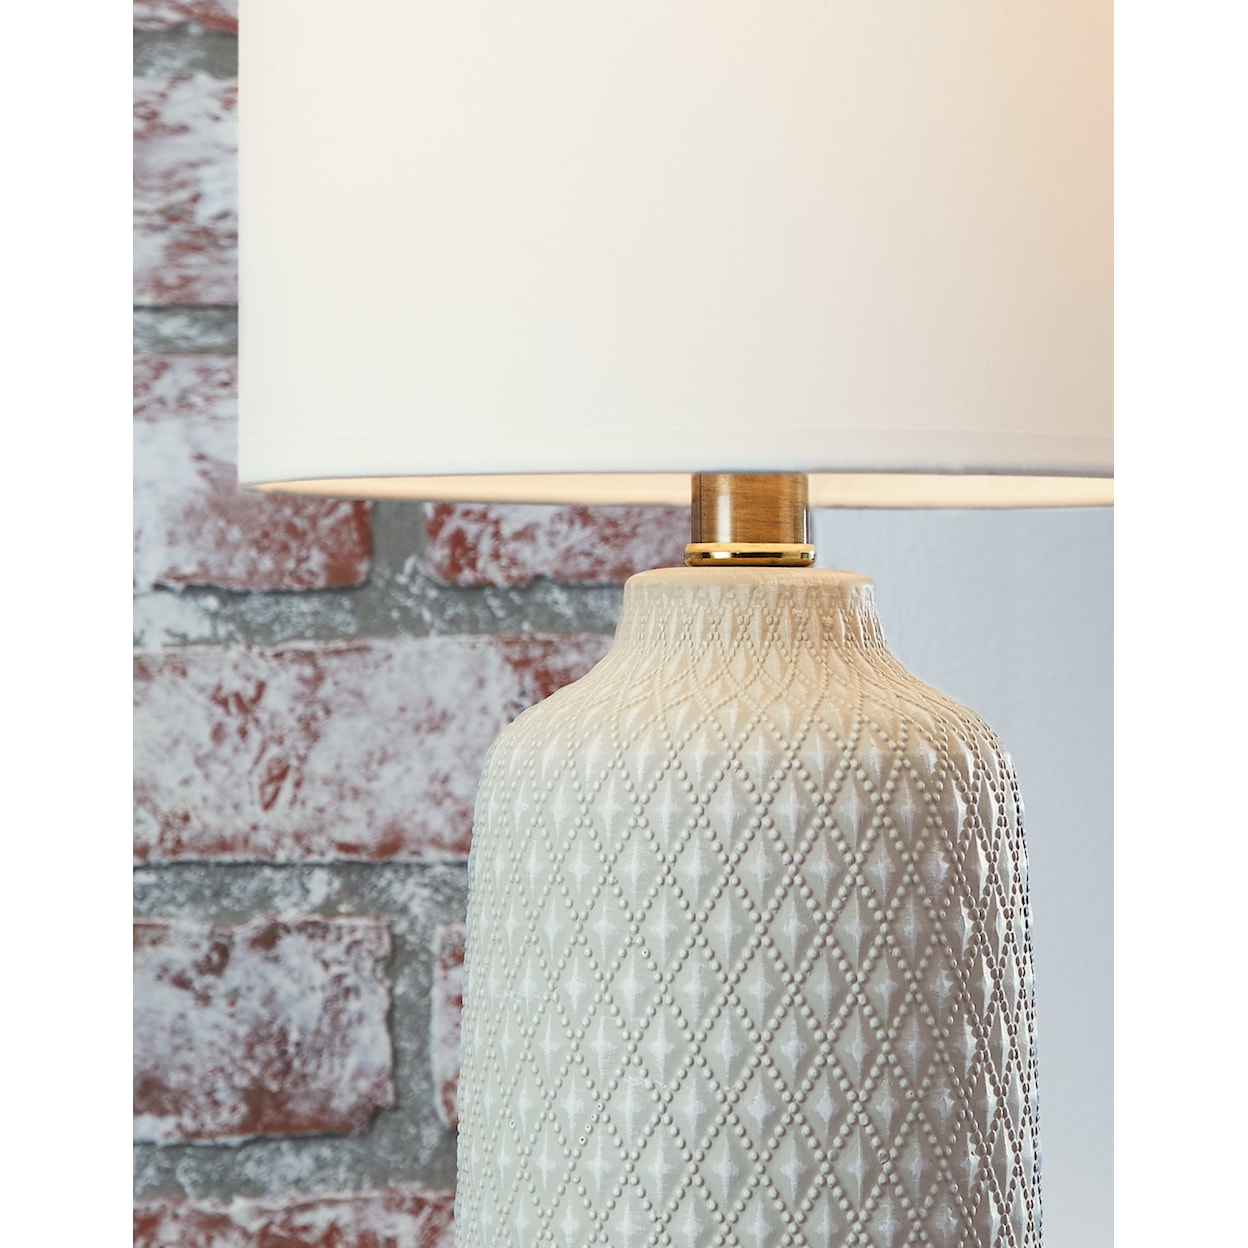 Signature Design by Ashley Donnford Ceramic Table Lamp